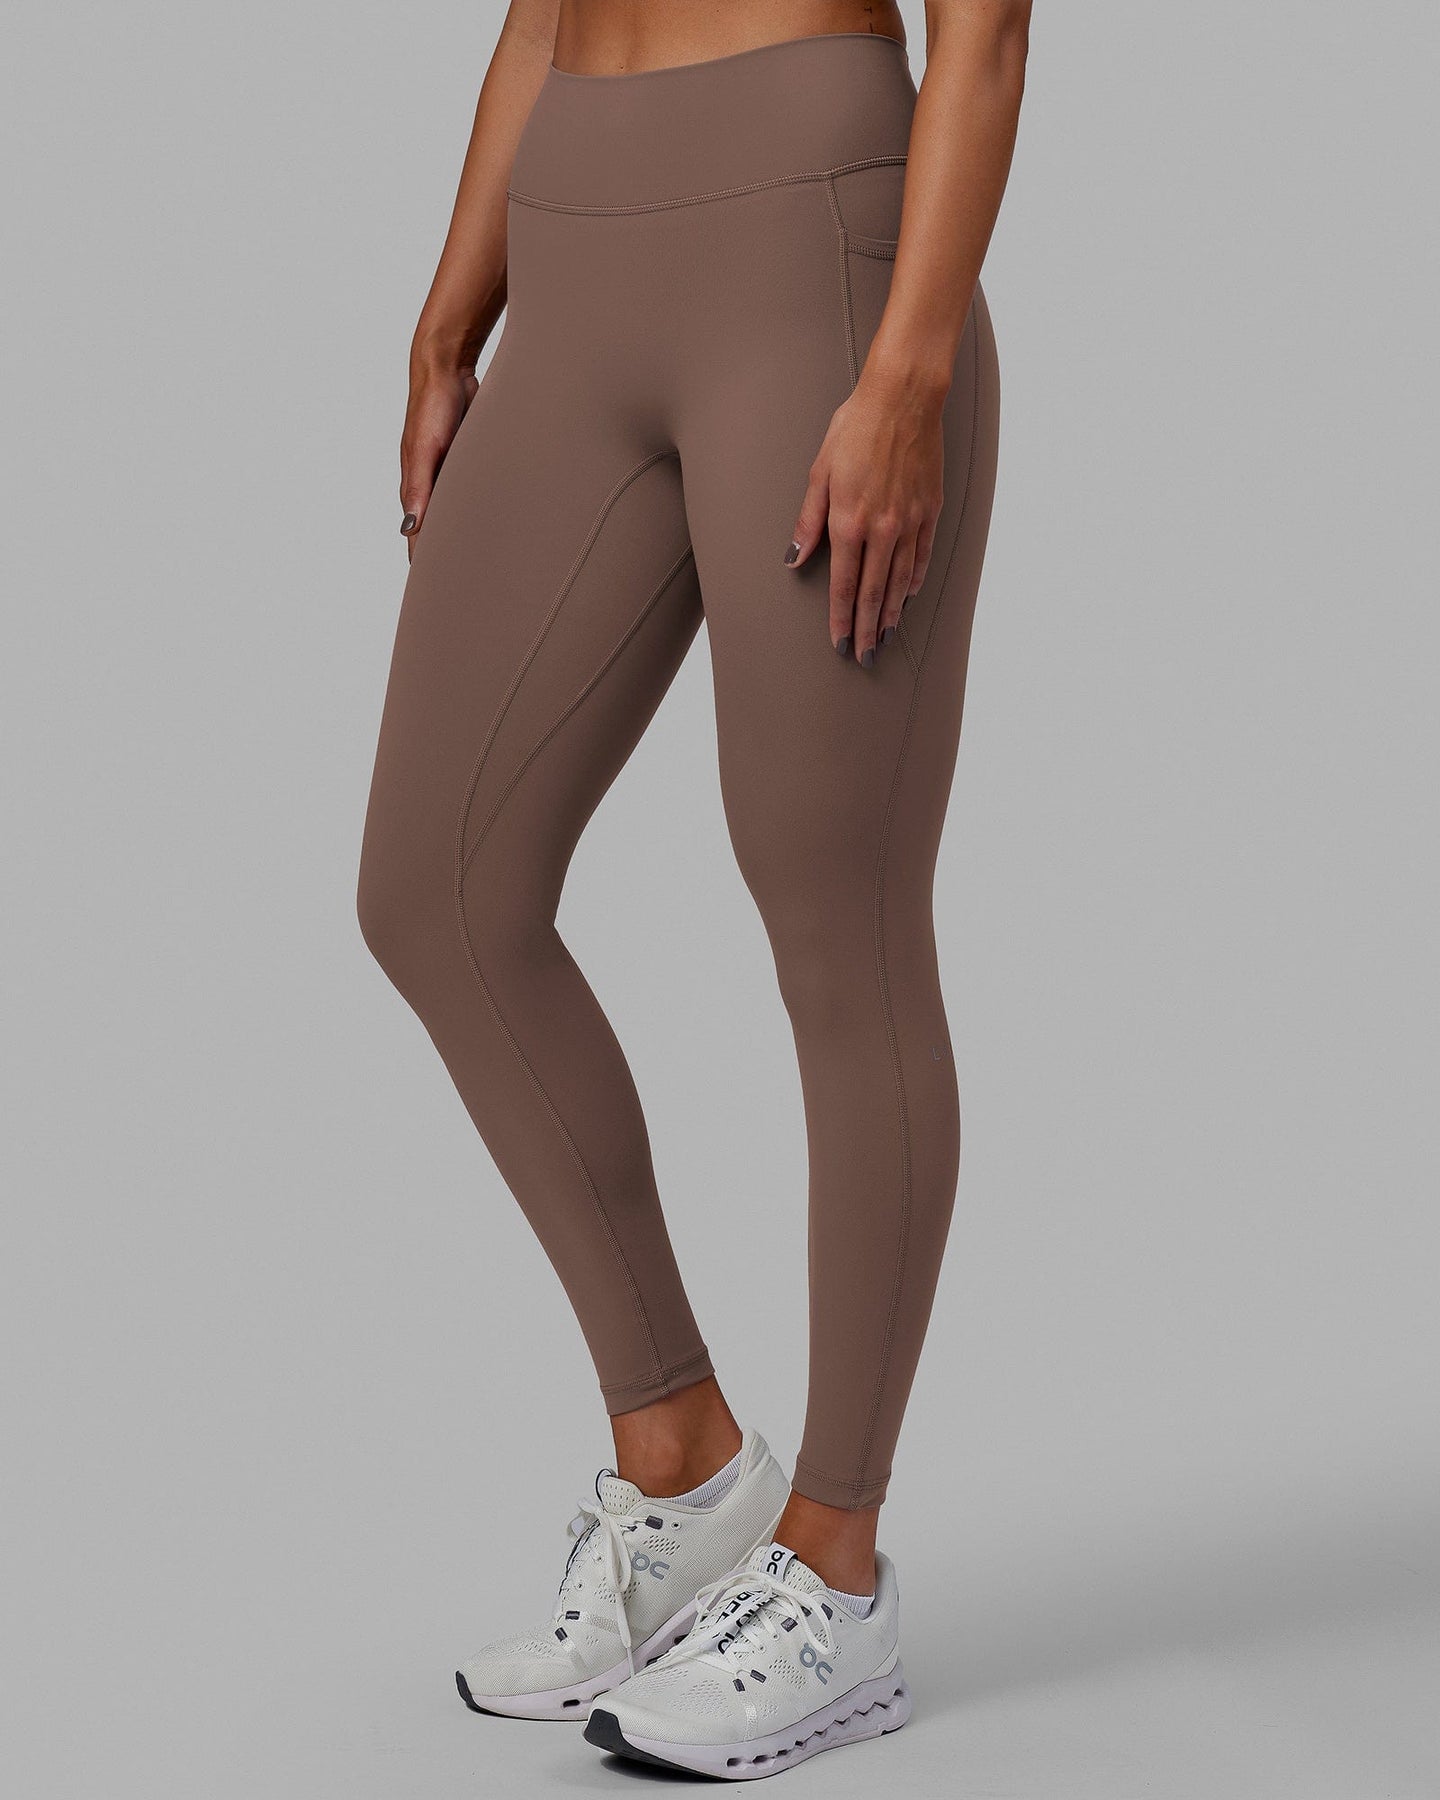 Fusion Full Length Tights - Deep Taupe